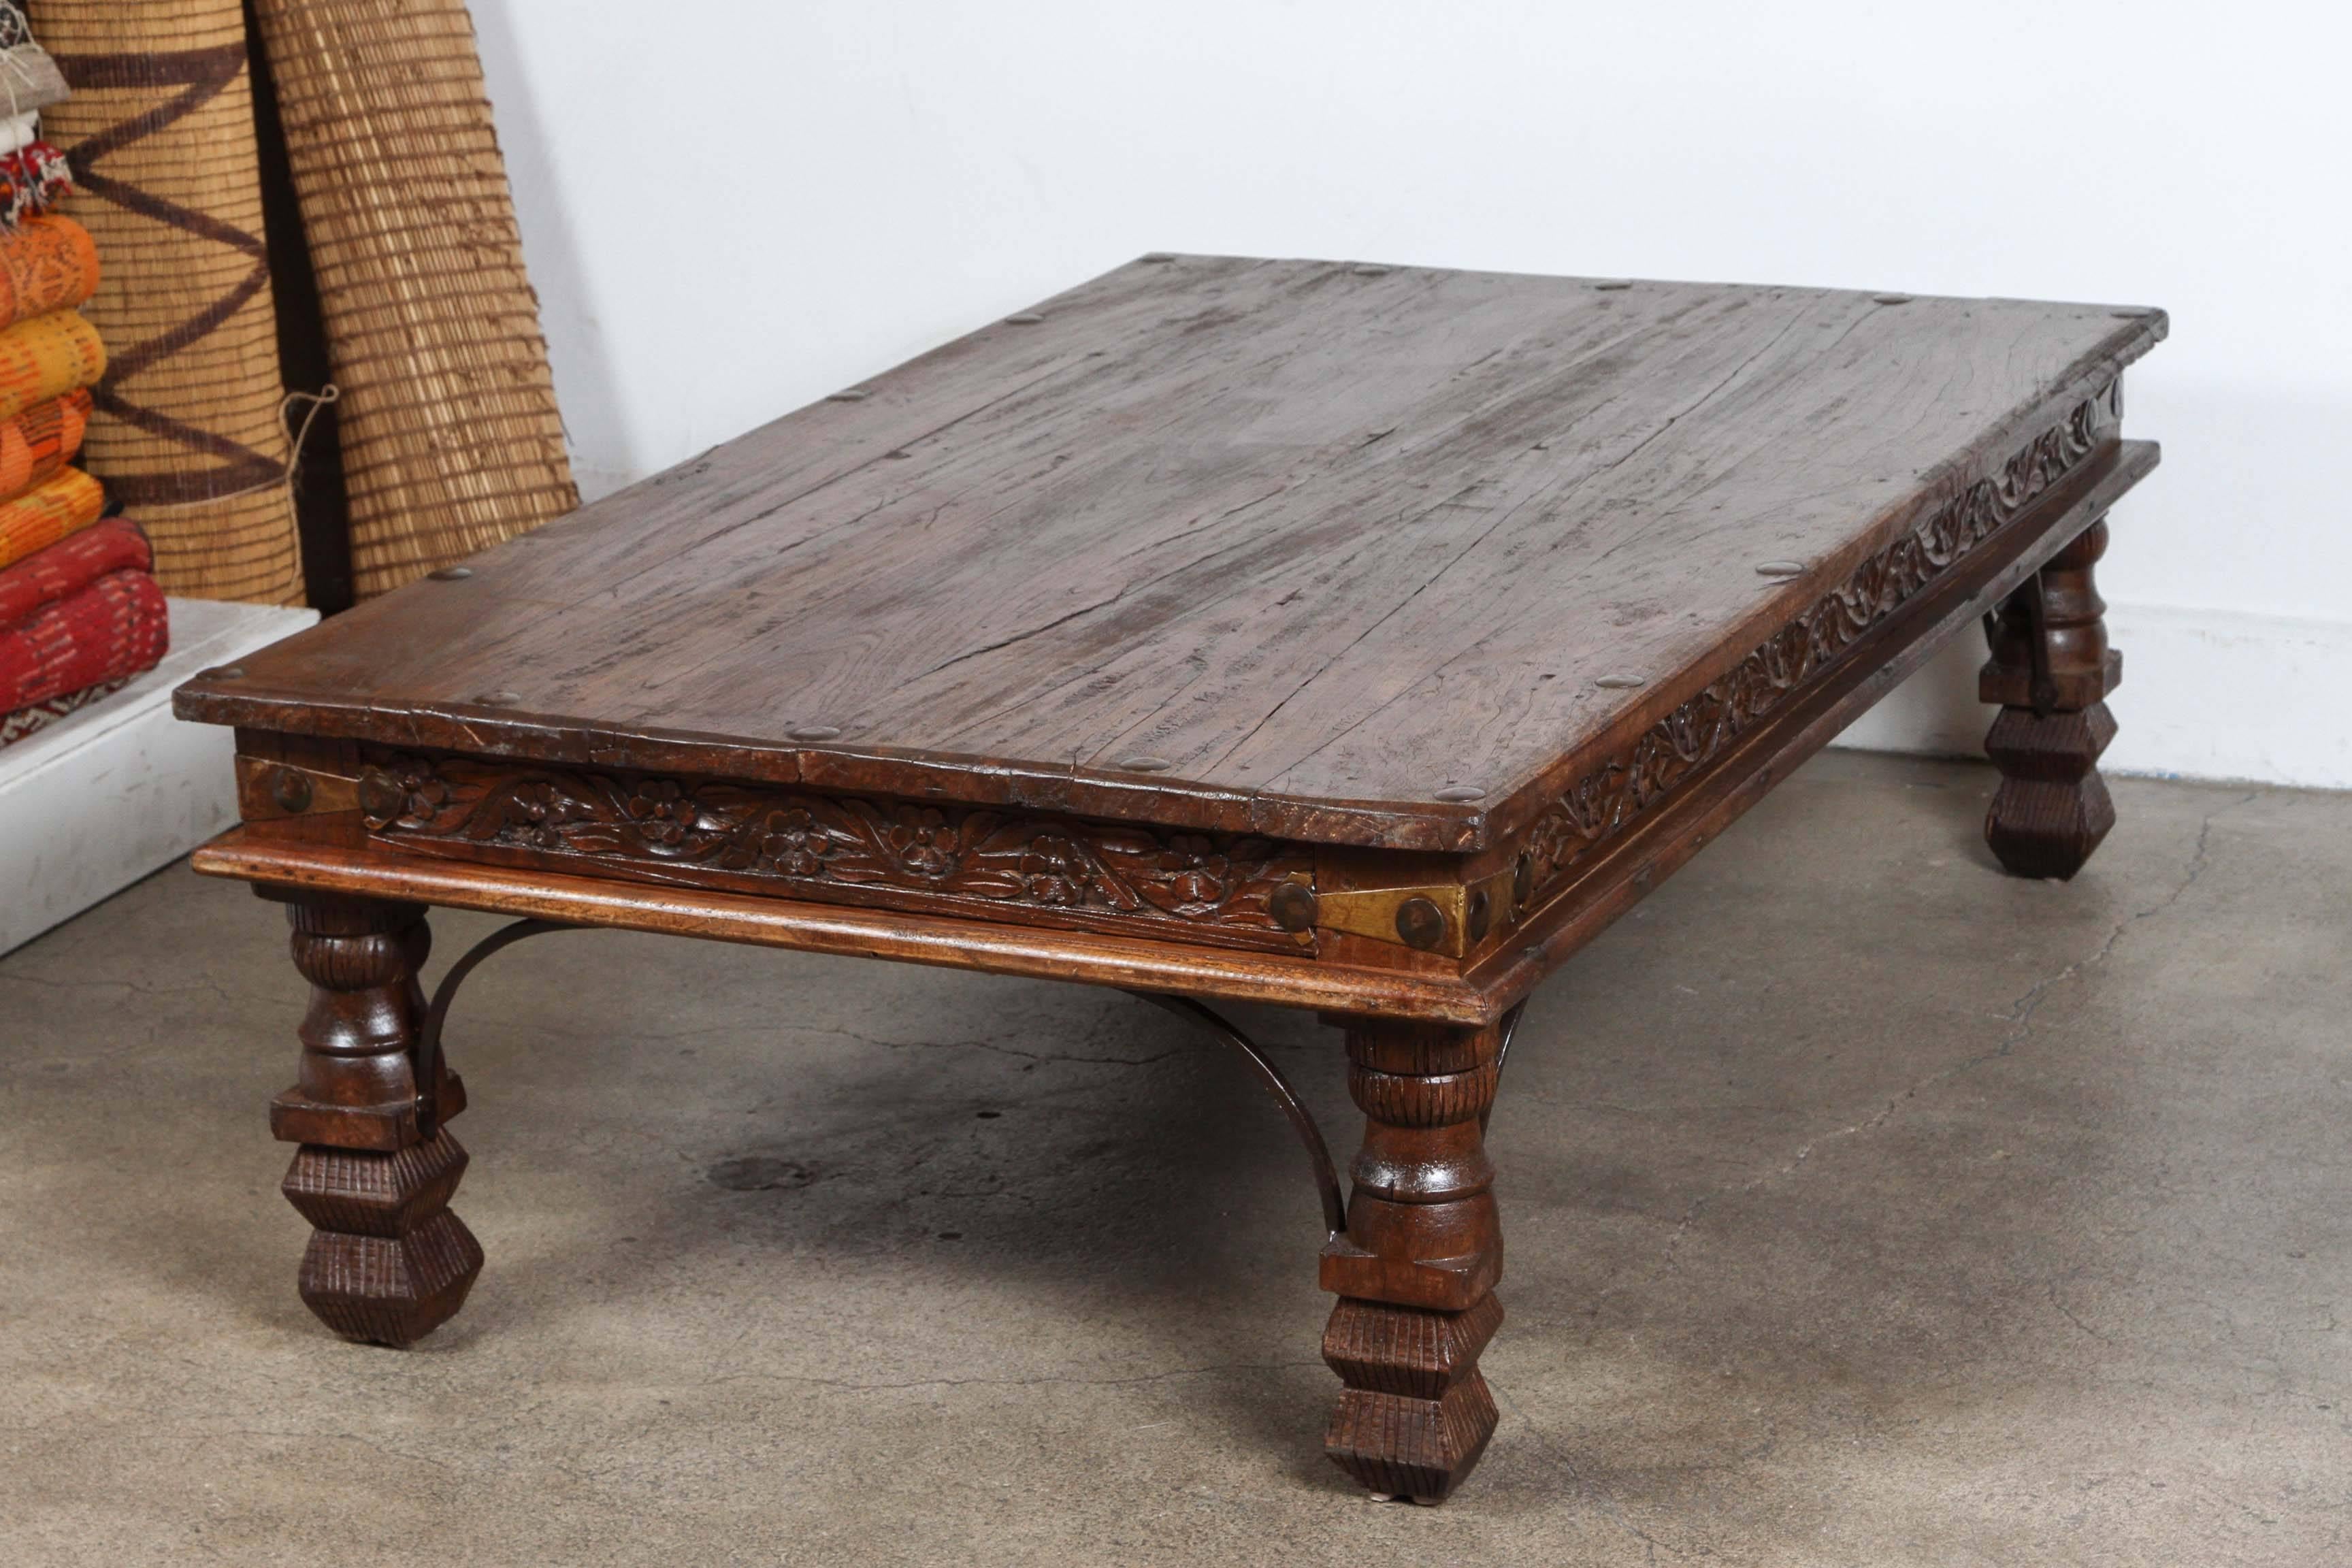 Large vintage Anglo-Indian teakwood rectangular coffee table.
Large rounded nailheads and metal accents support, very nicely carved legs and sides and the corners are reinforced with metal iron pieces.
Spanish Portuguese colonial style.